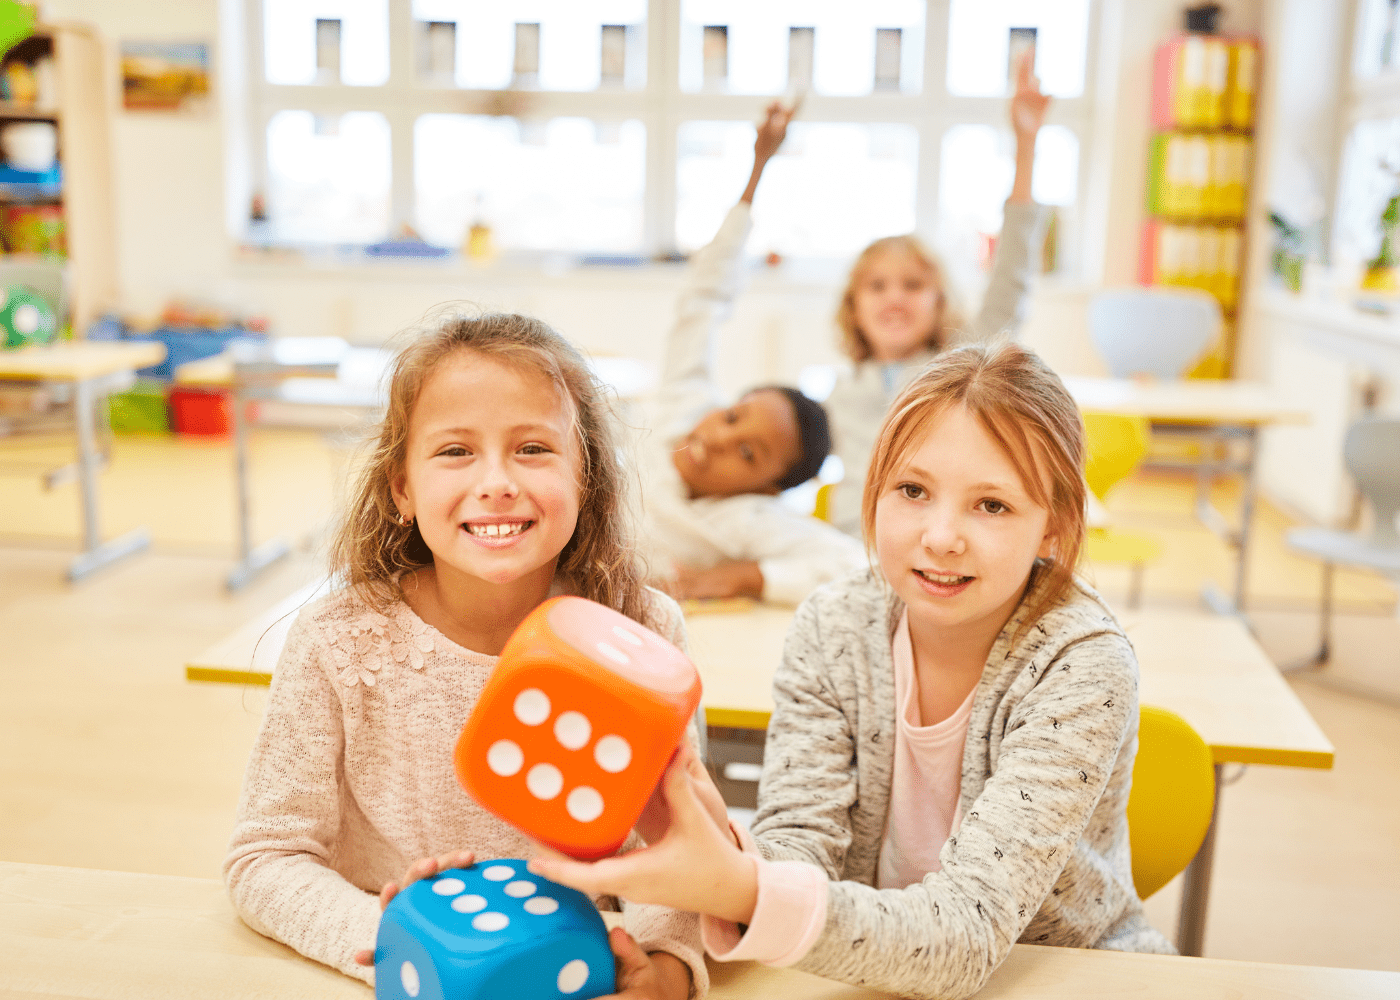 Four children in a classroom with the two in the foreground holding giant dice for a math game.